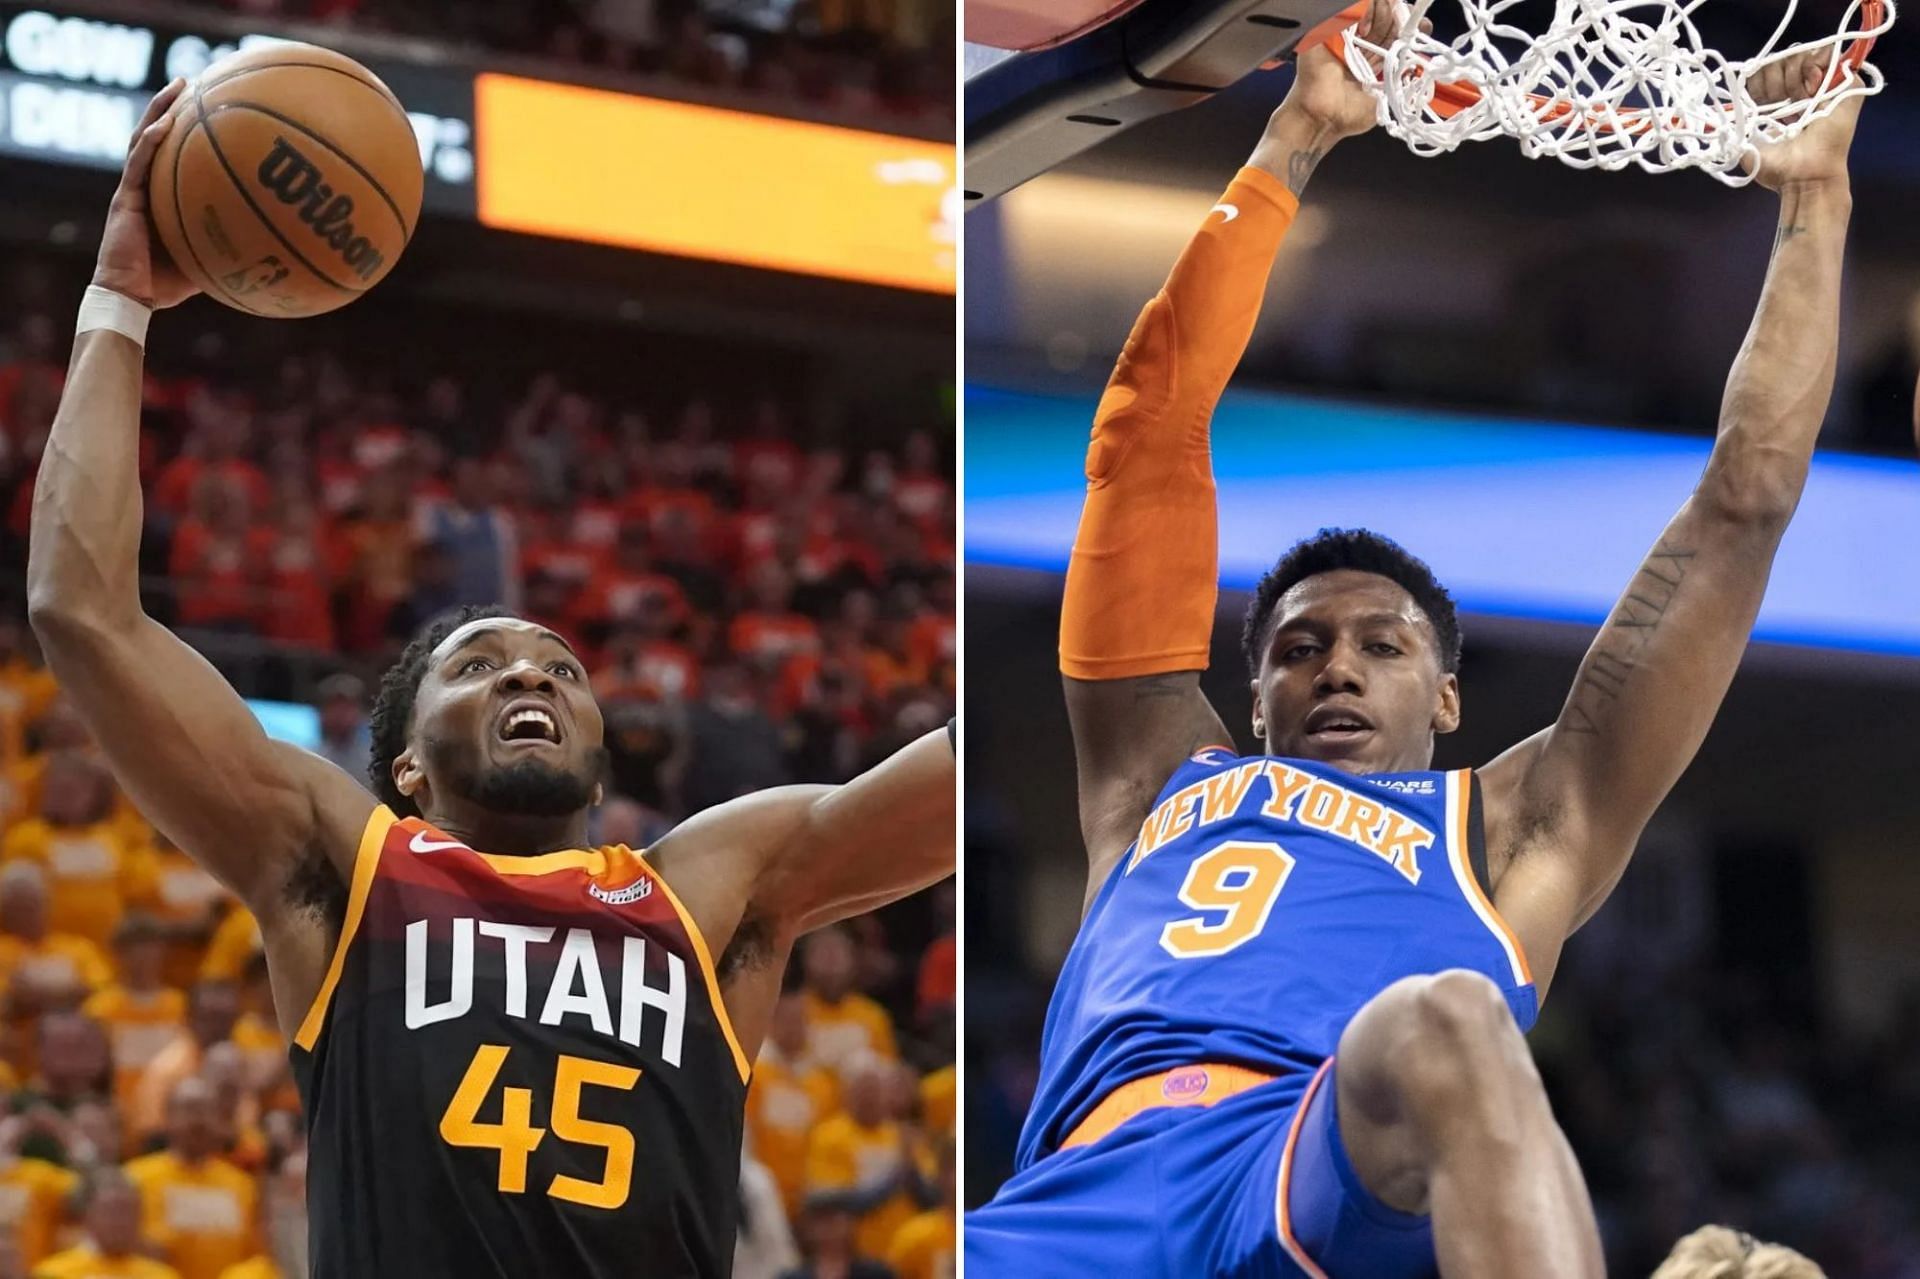 The New York Knicks are positive they can get Donovan Mitchell [left] while still keeping RJ Barrett [right]. [Photo: New York Post]